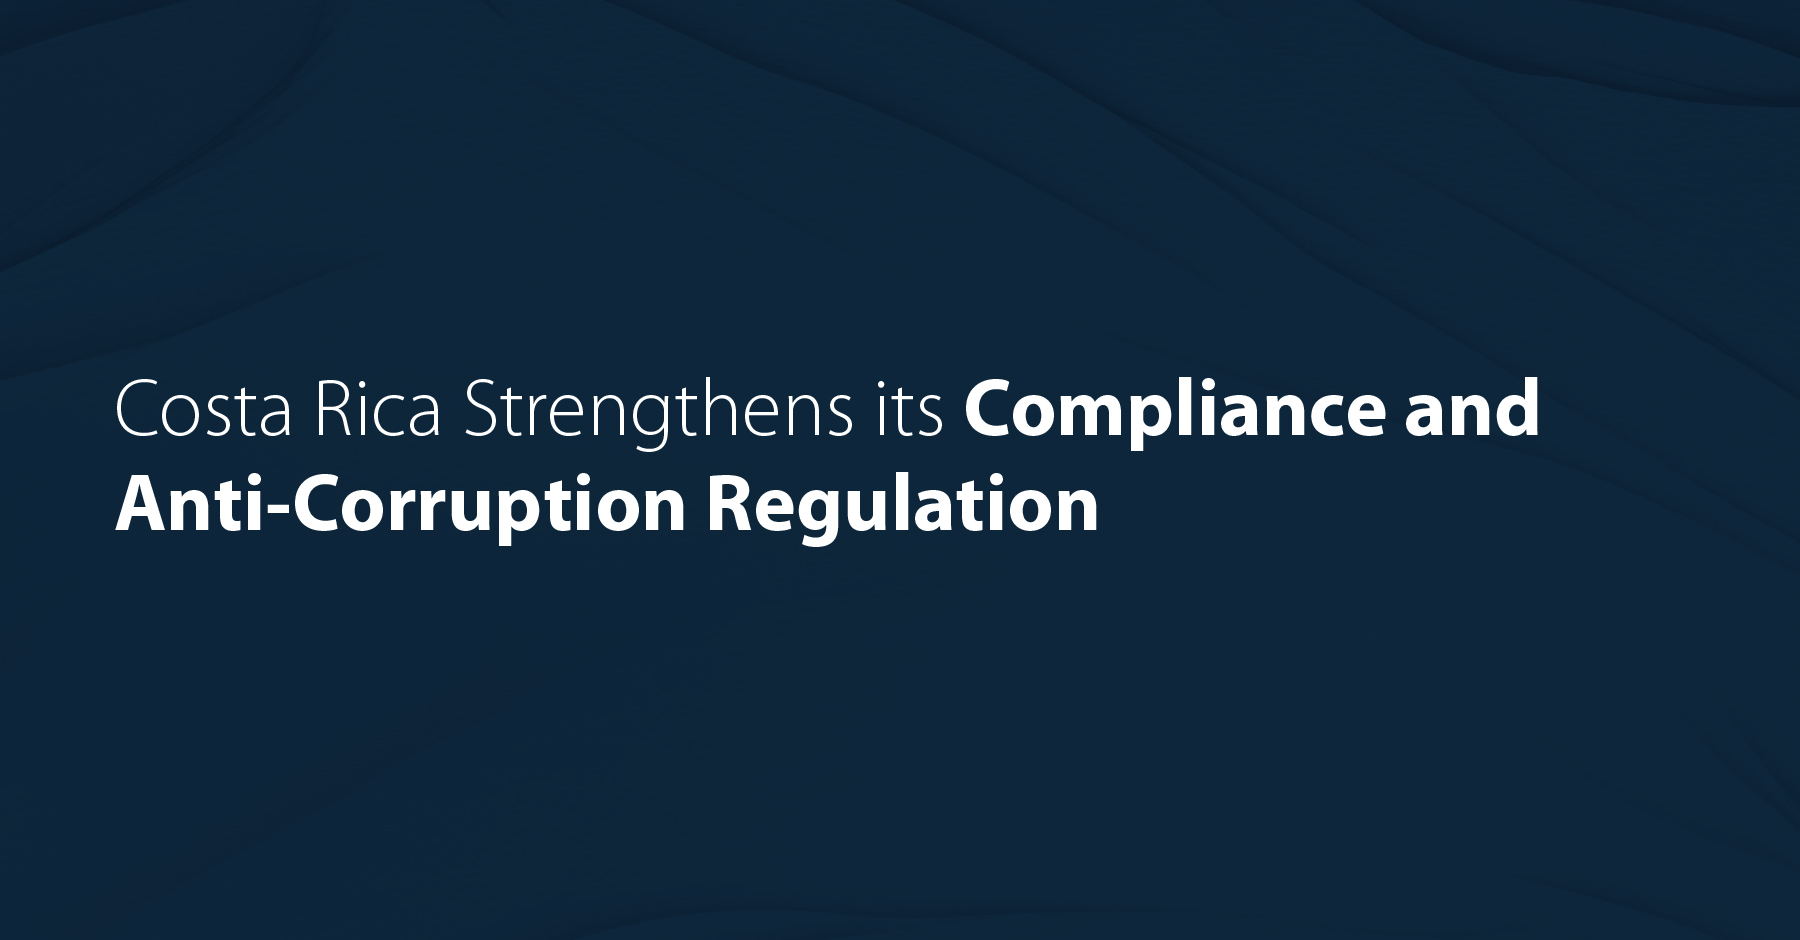 Costa Rica Strengthens its Compliance and Anti-Corruption Regulation